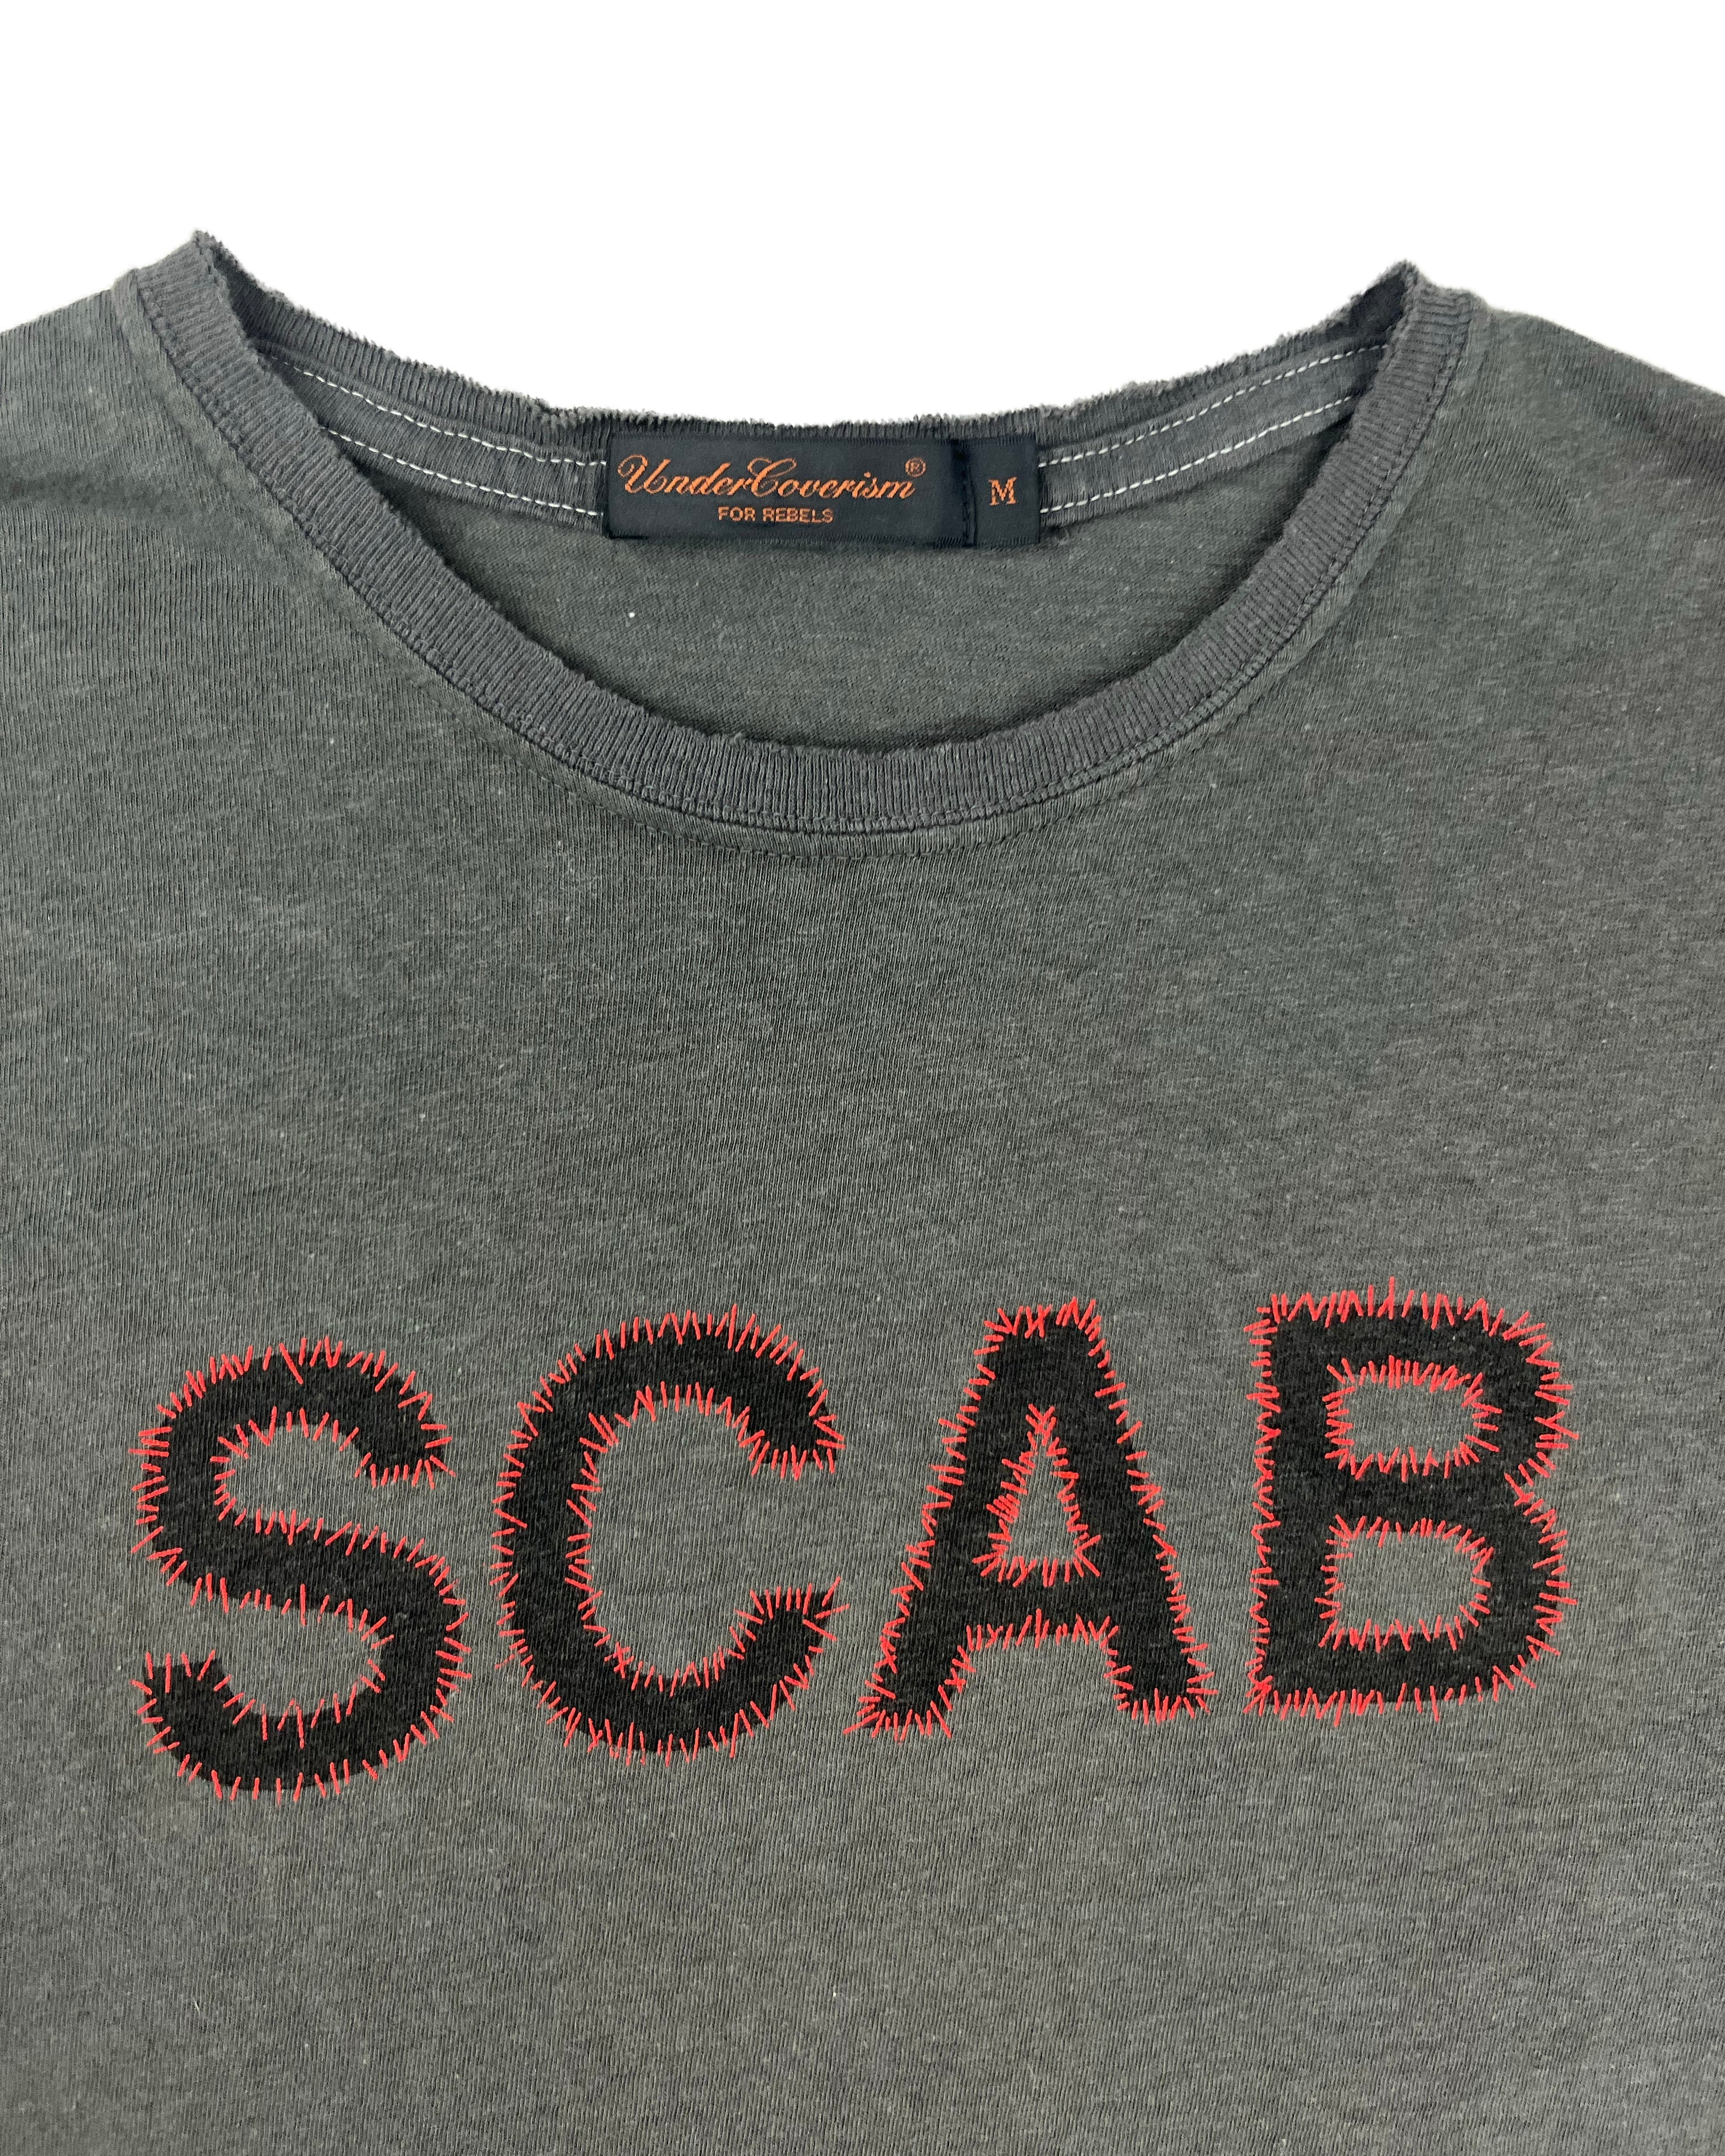 Undercover ss03 Scab tee